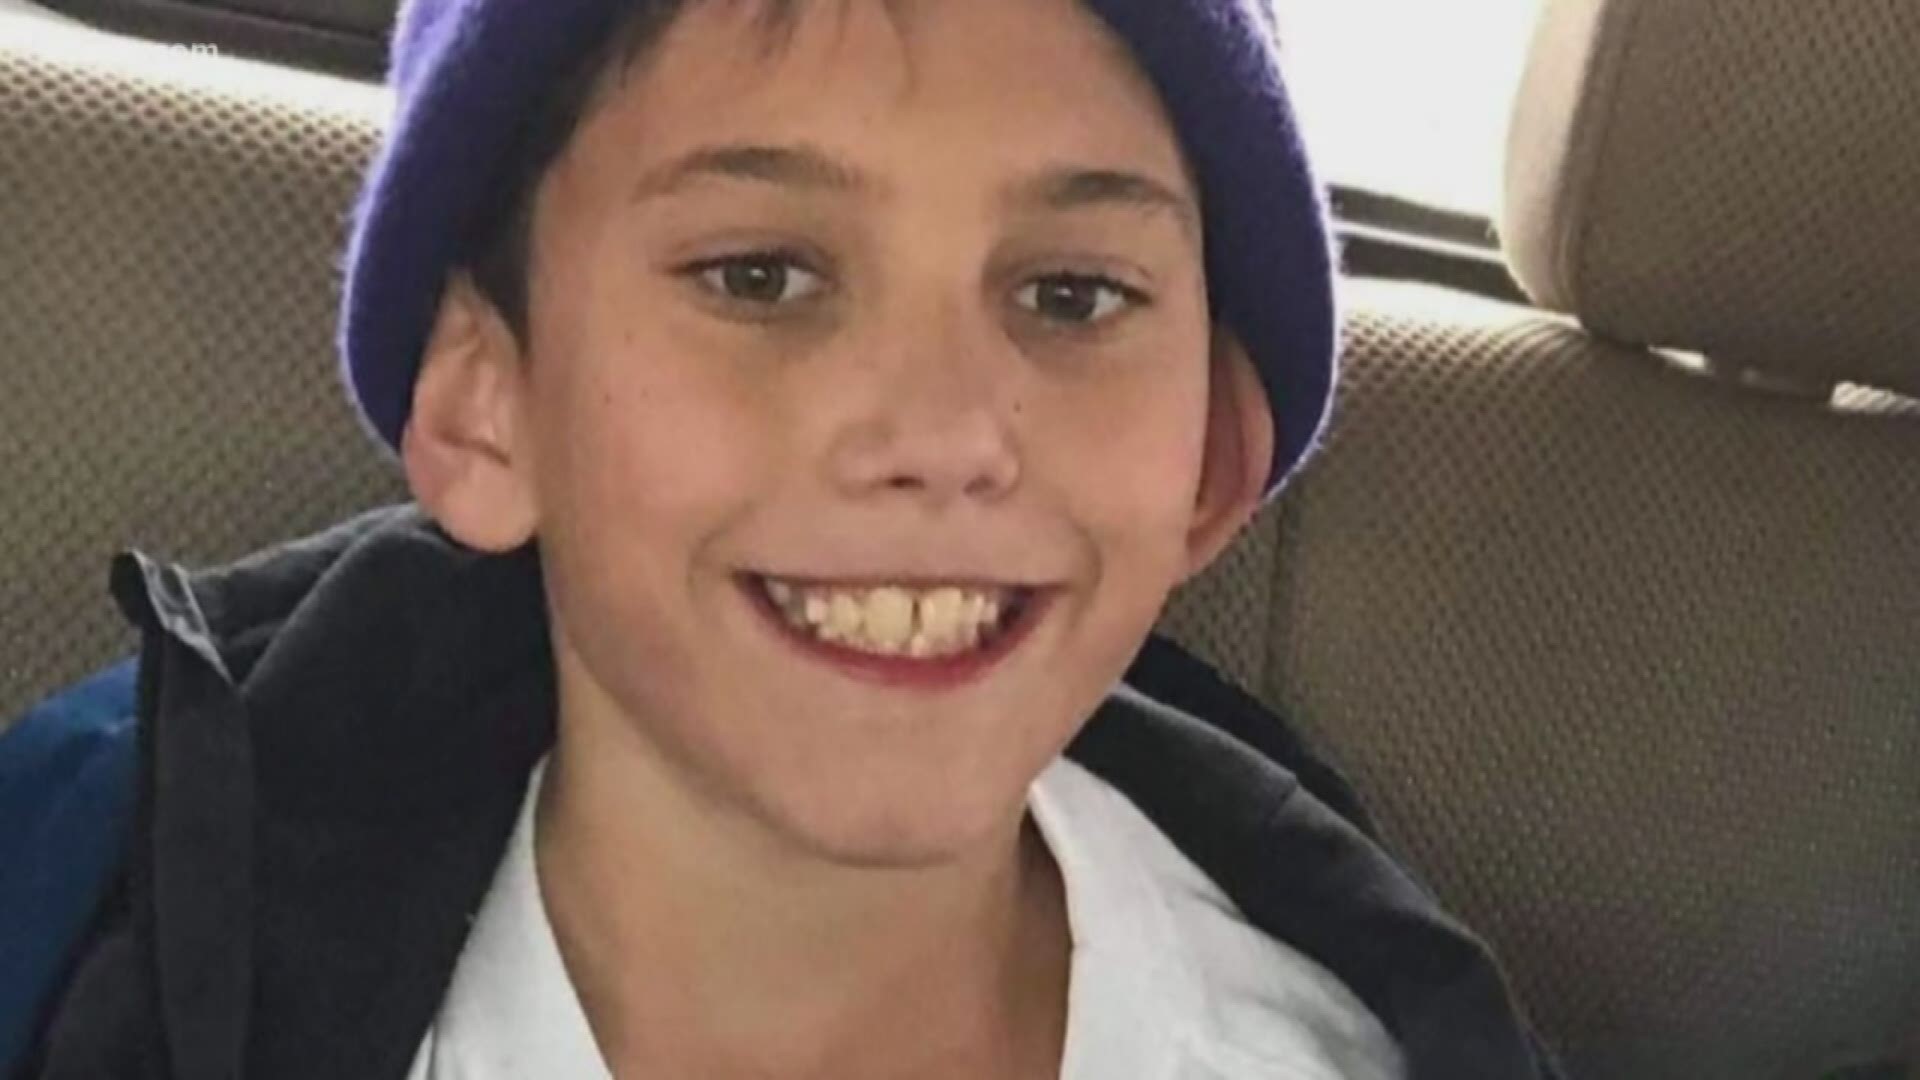 Officials from the El Paso Sheriff’s Office on Friday told KRDO they are not using citizen volunteers to aid in the search for missing 11-year-old Gannon Stauch.